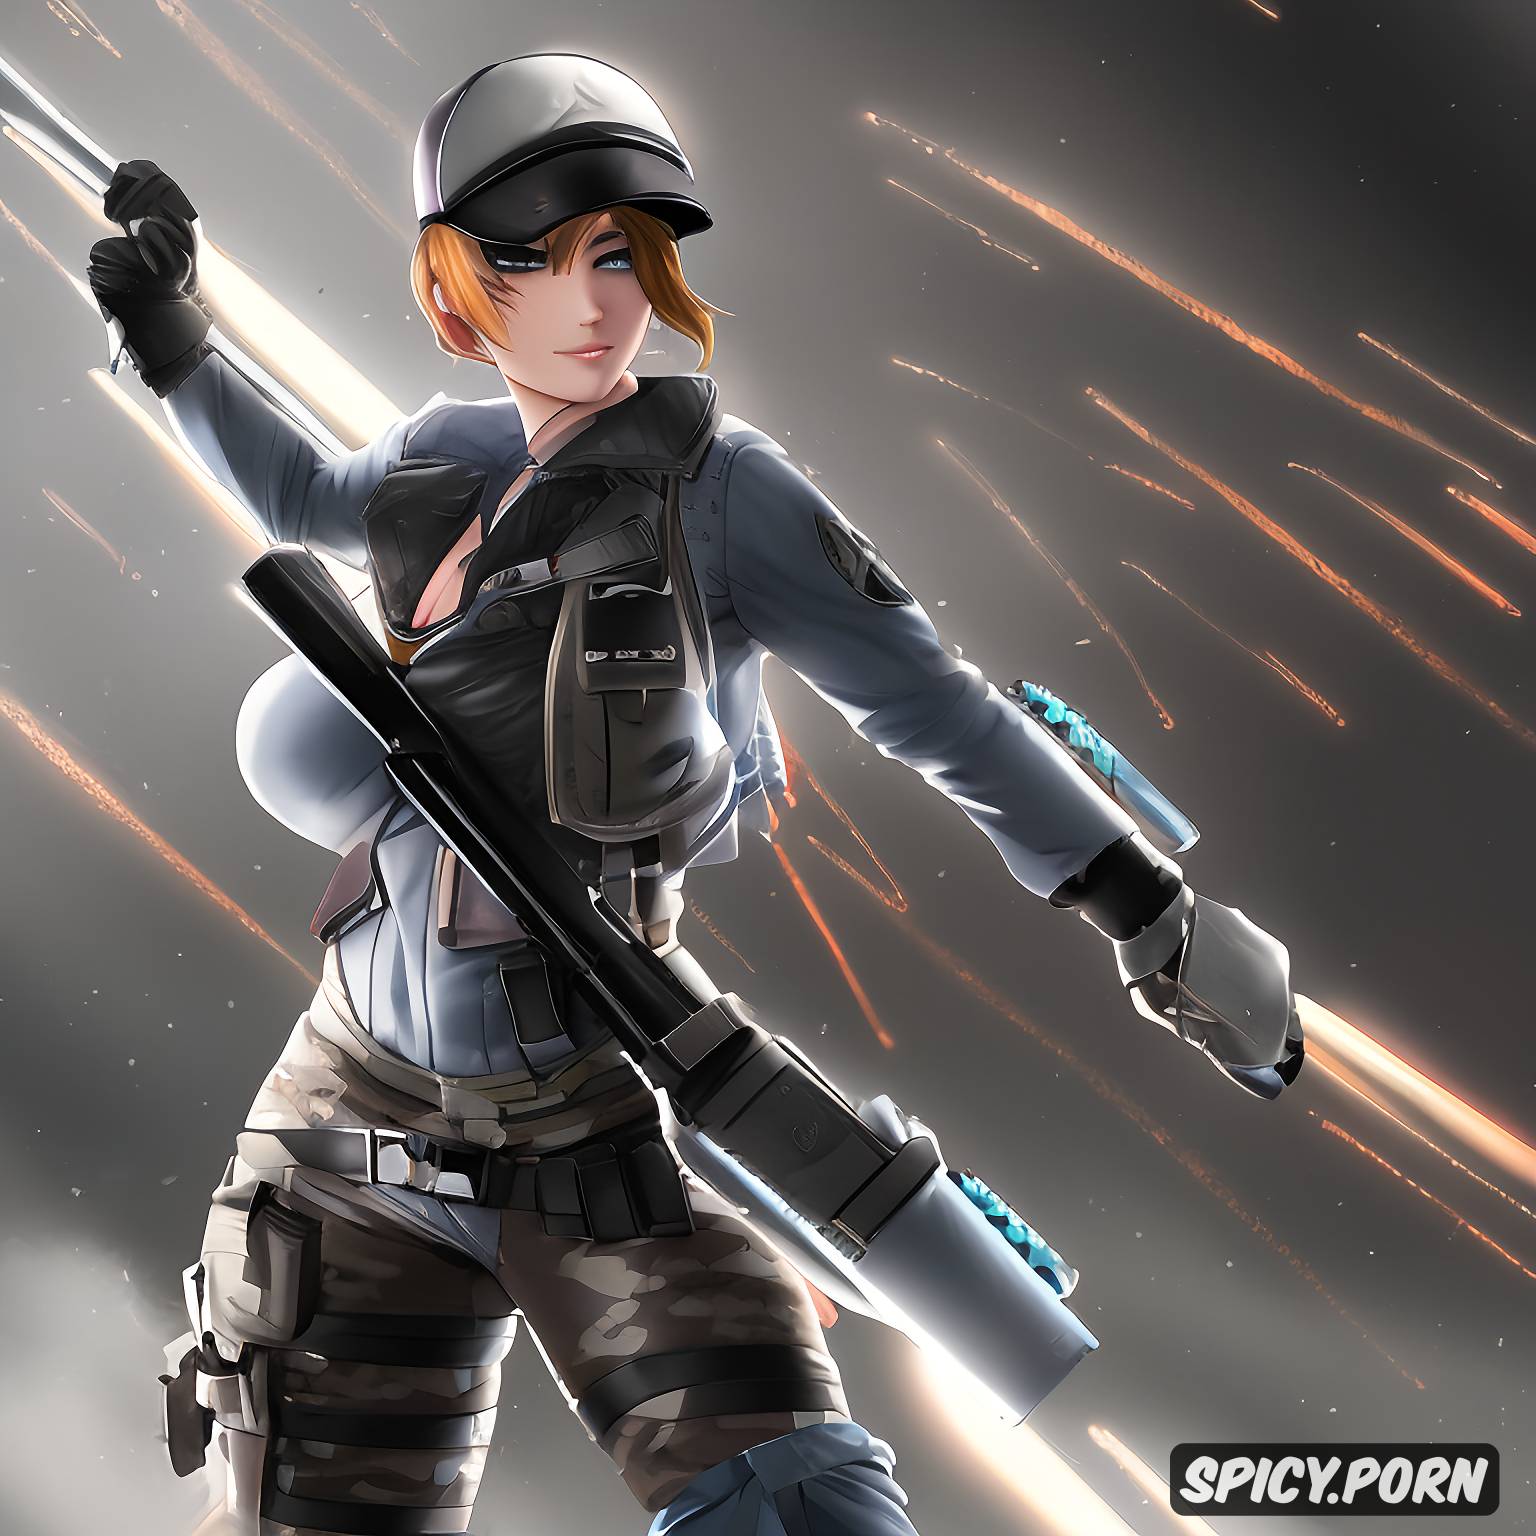 Image of r6, ash from rainbow six siege, exposed, nude, lewd - spicy.porn